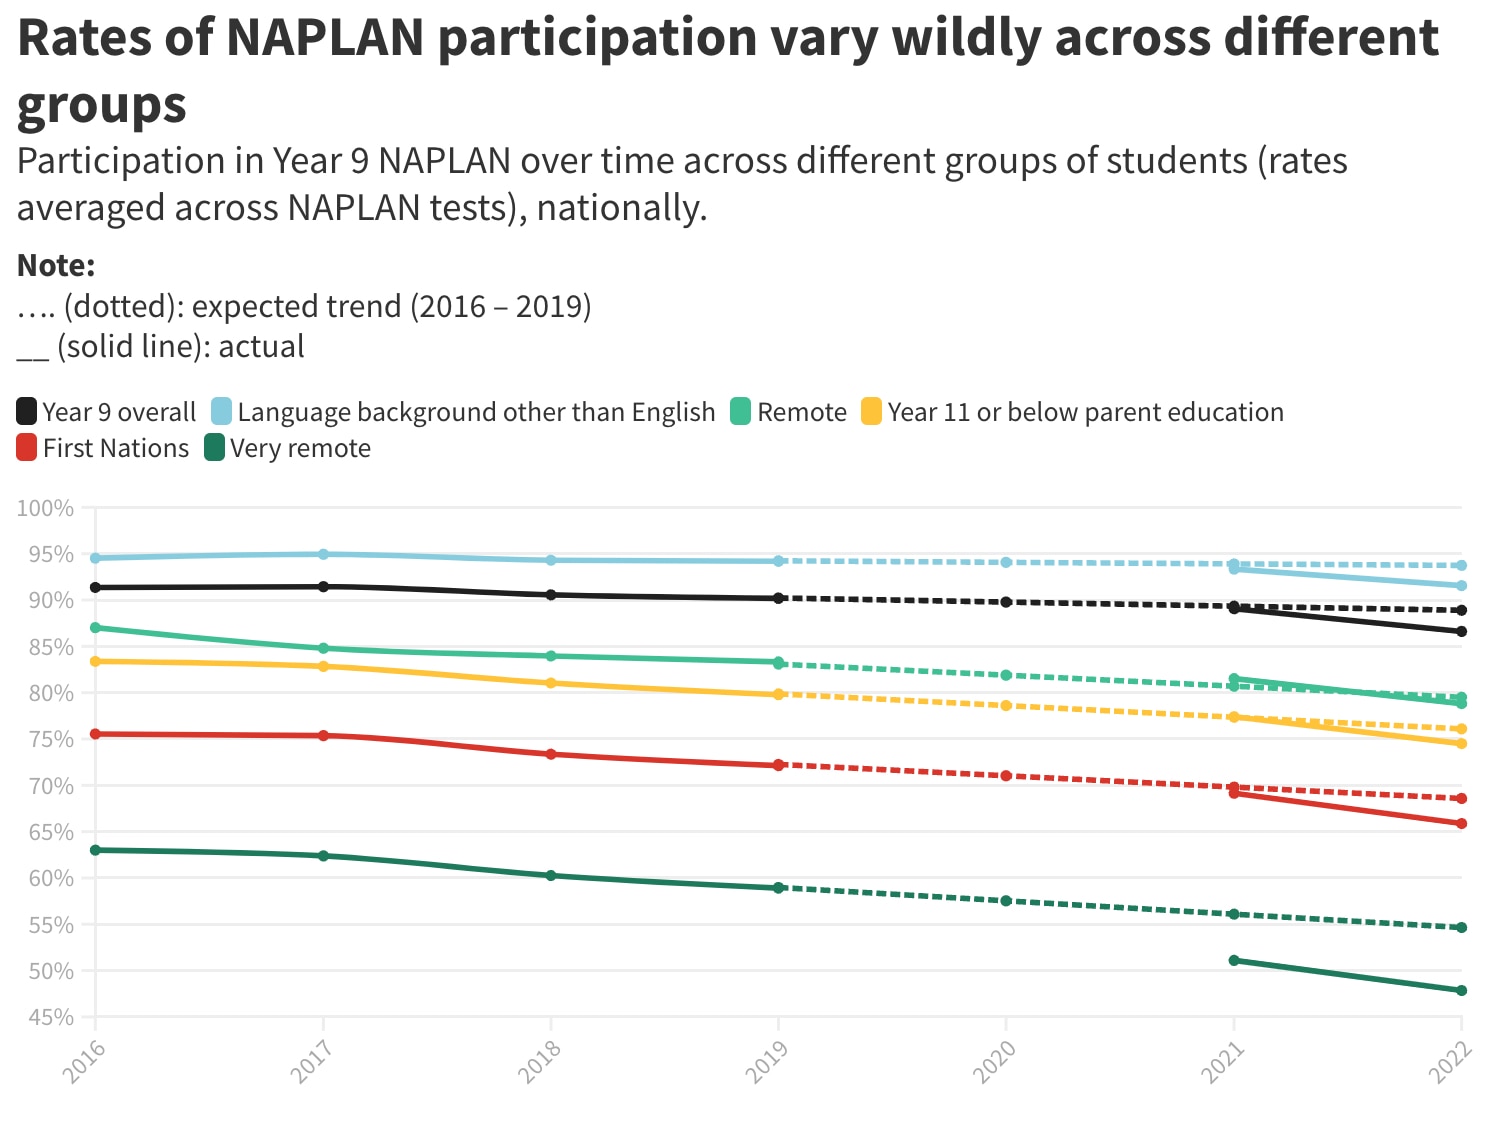 A line graph charts participation in Year 9 NAPLAN over time across different groups of students